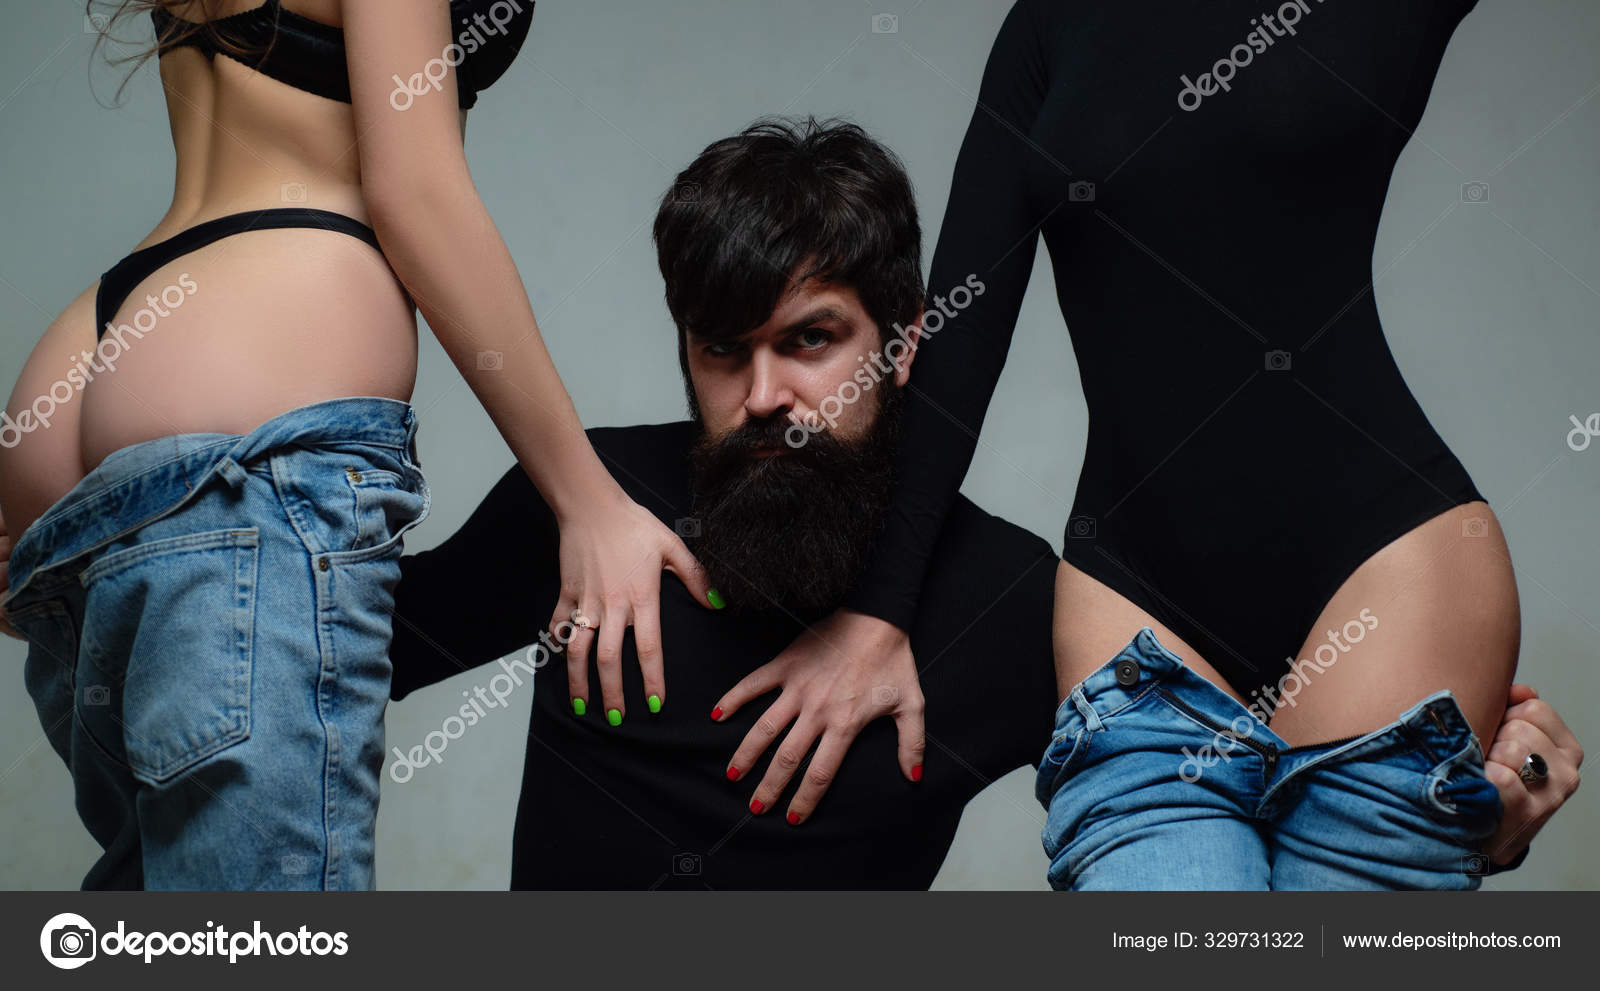 Threesome concept. Three people having group sex together. One man and two sexy women. Polygamy or bigamy. Swinger, orgy or trio having sex. Bisexual lady hq picture